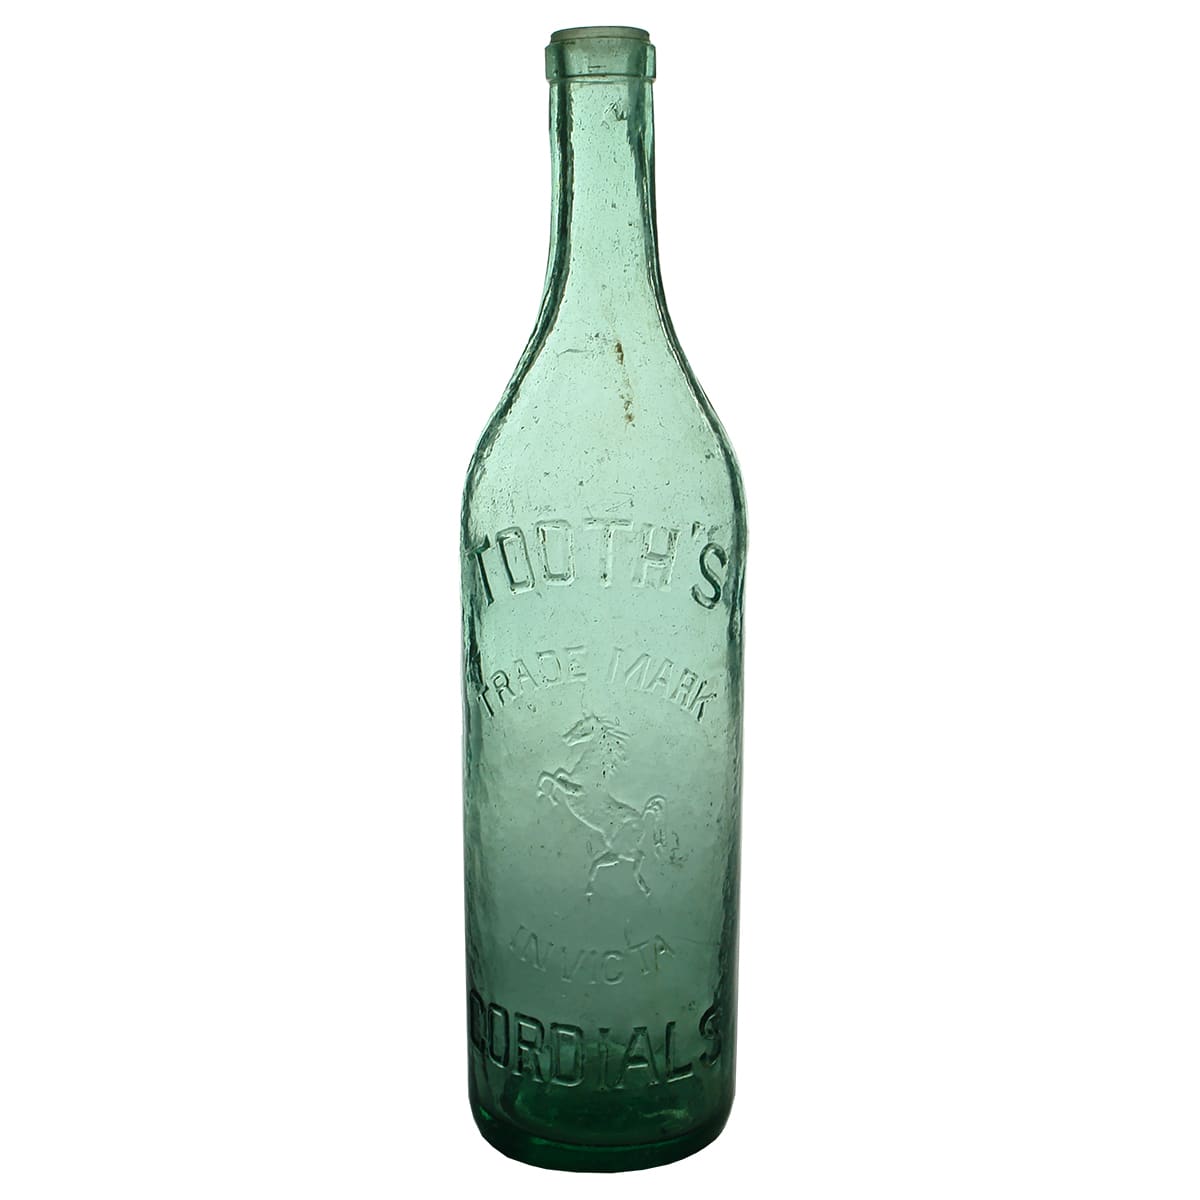 Cordial. Tooth's Invicta Cordials. Sydney. No size or base mark embossed. Aqua. 26 oz. (New South Wales)